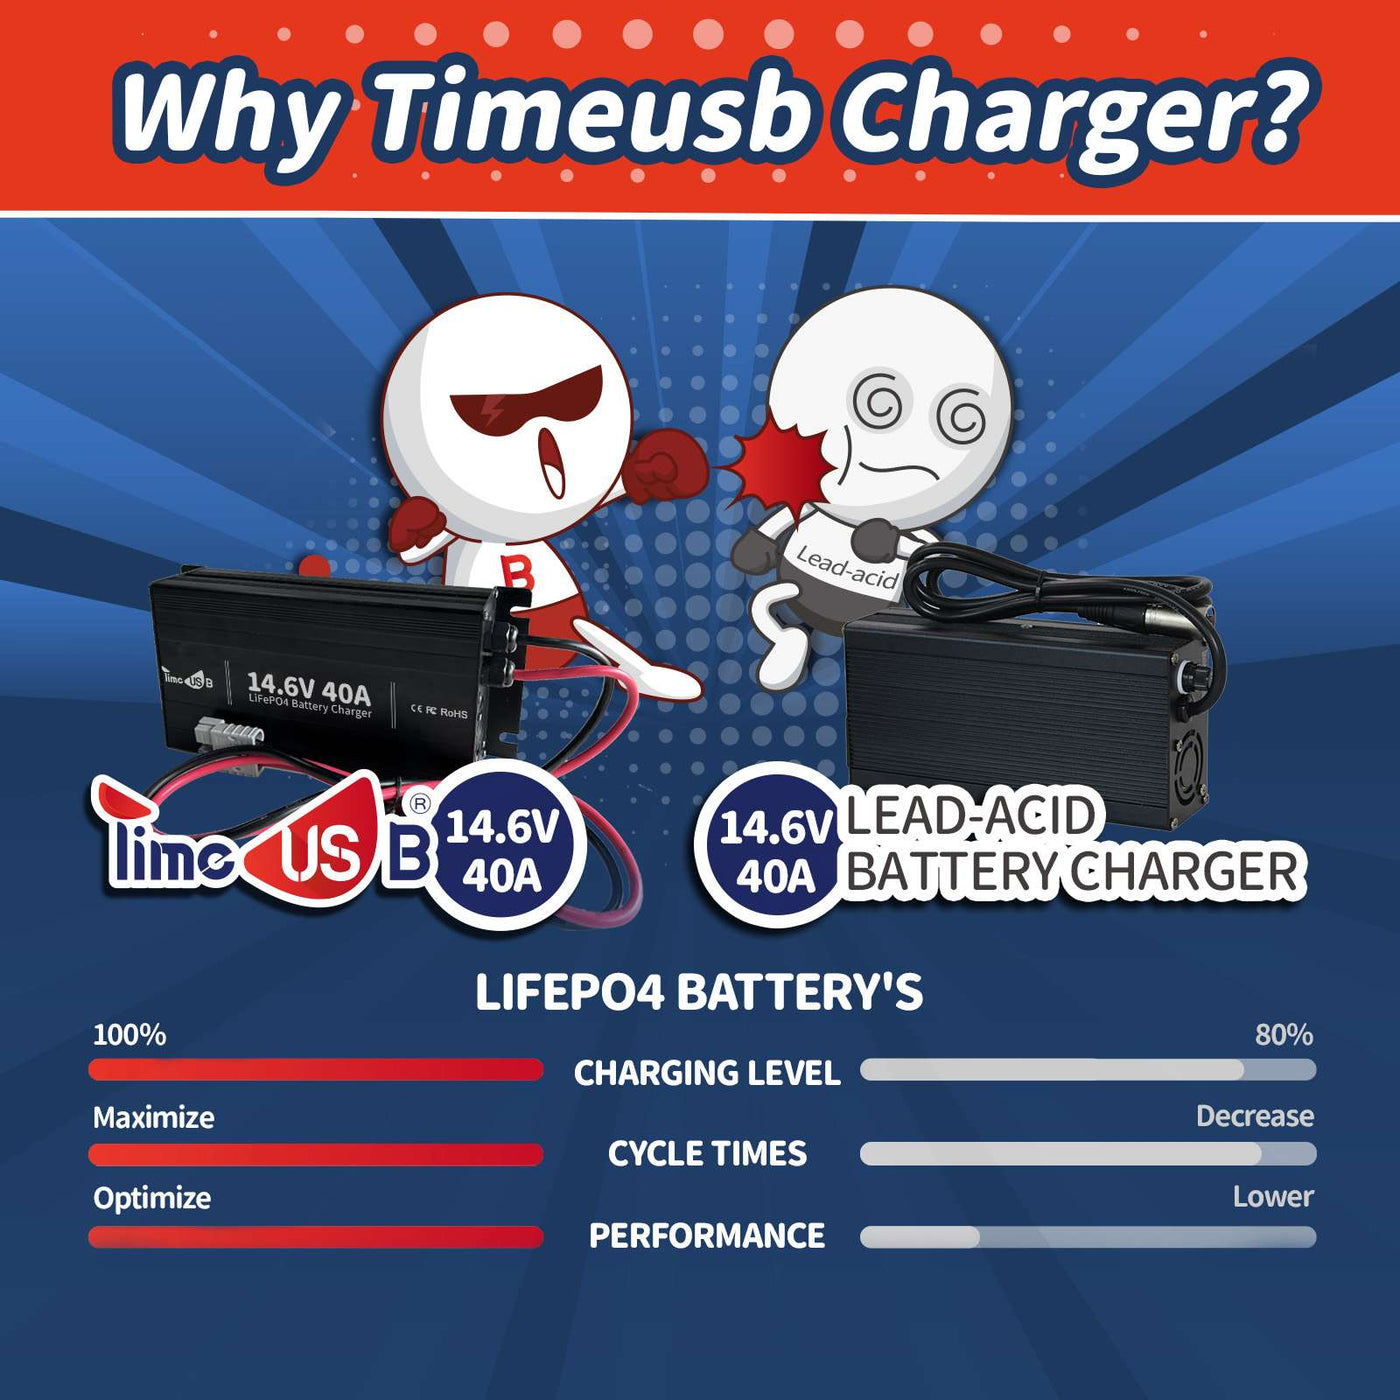 [Final: ＄142.49] Timeusb 14.6V 40A Fast Charging LiFePO4 Battery Charger